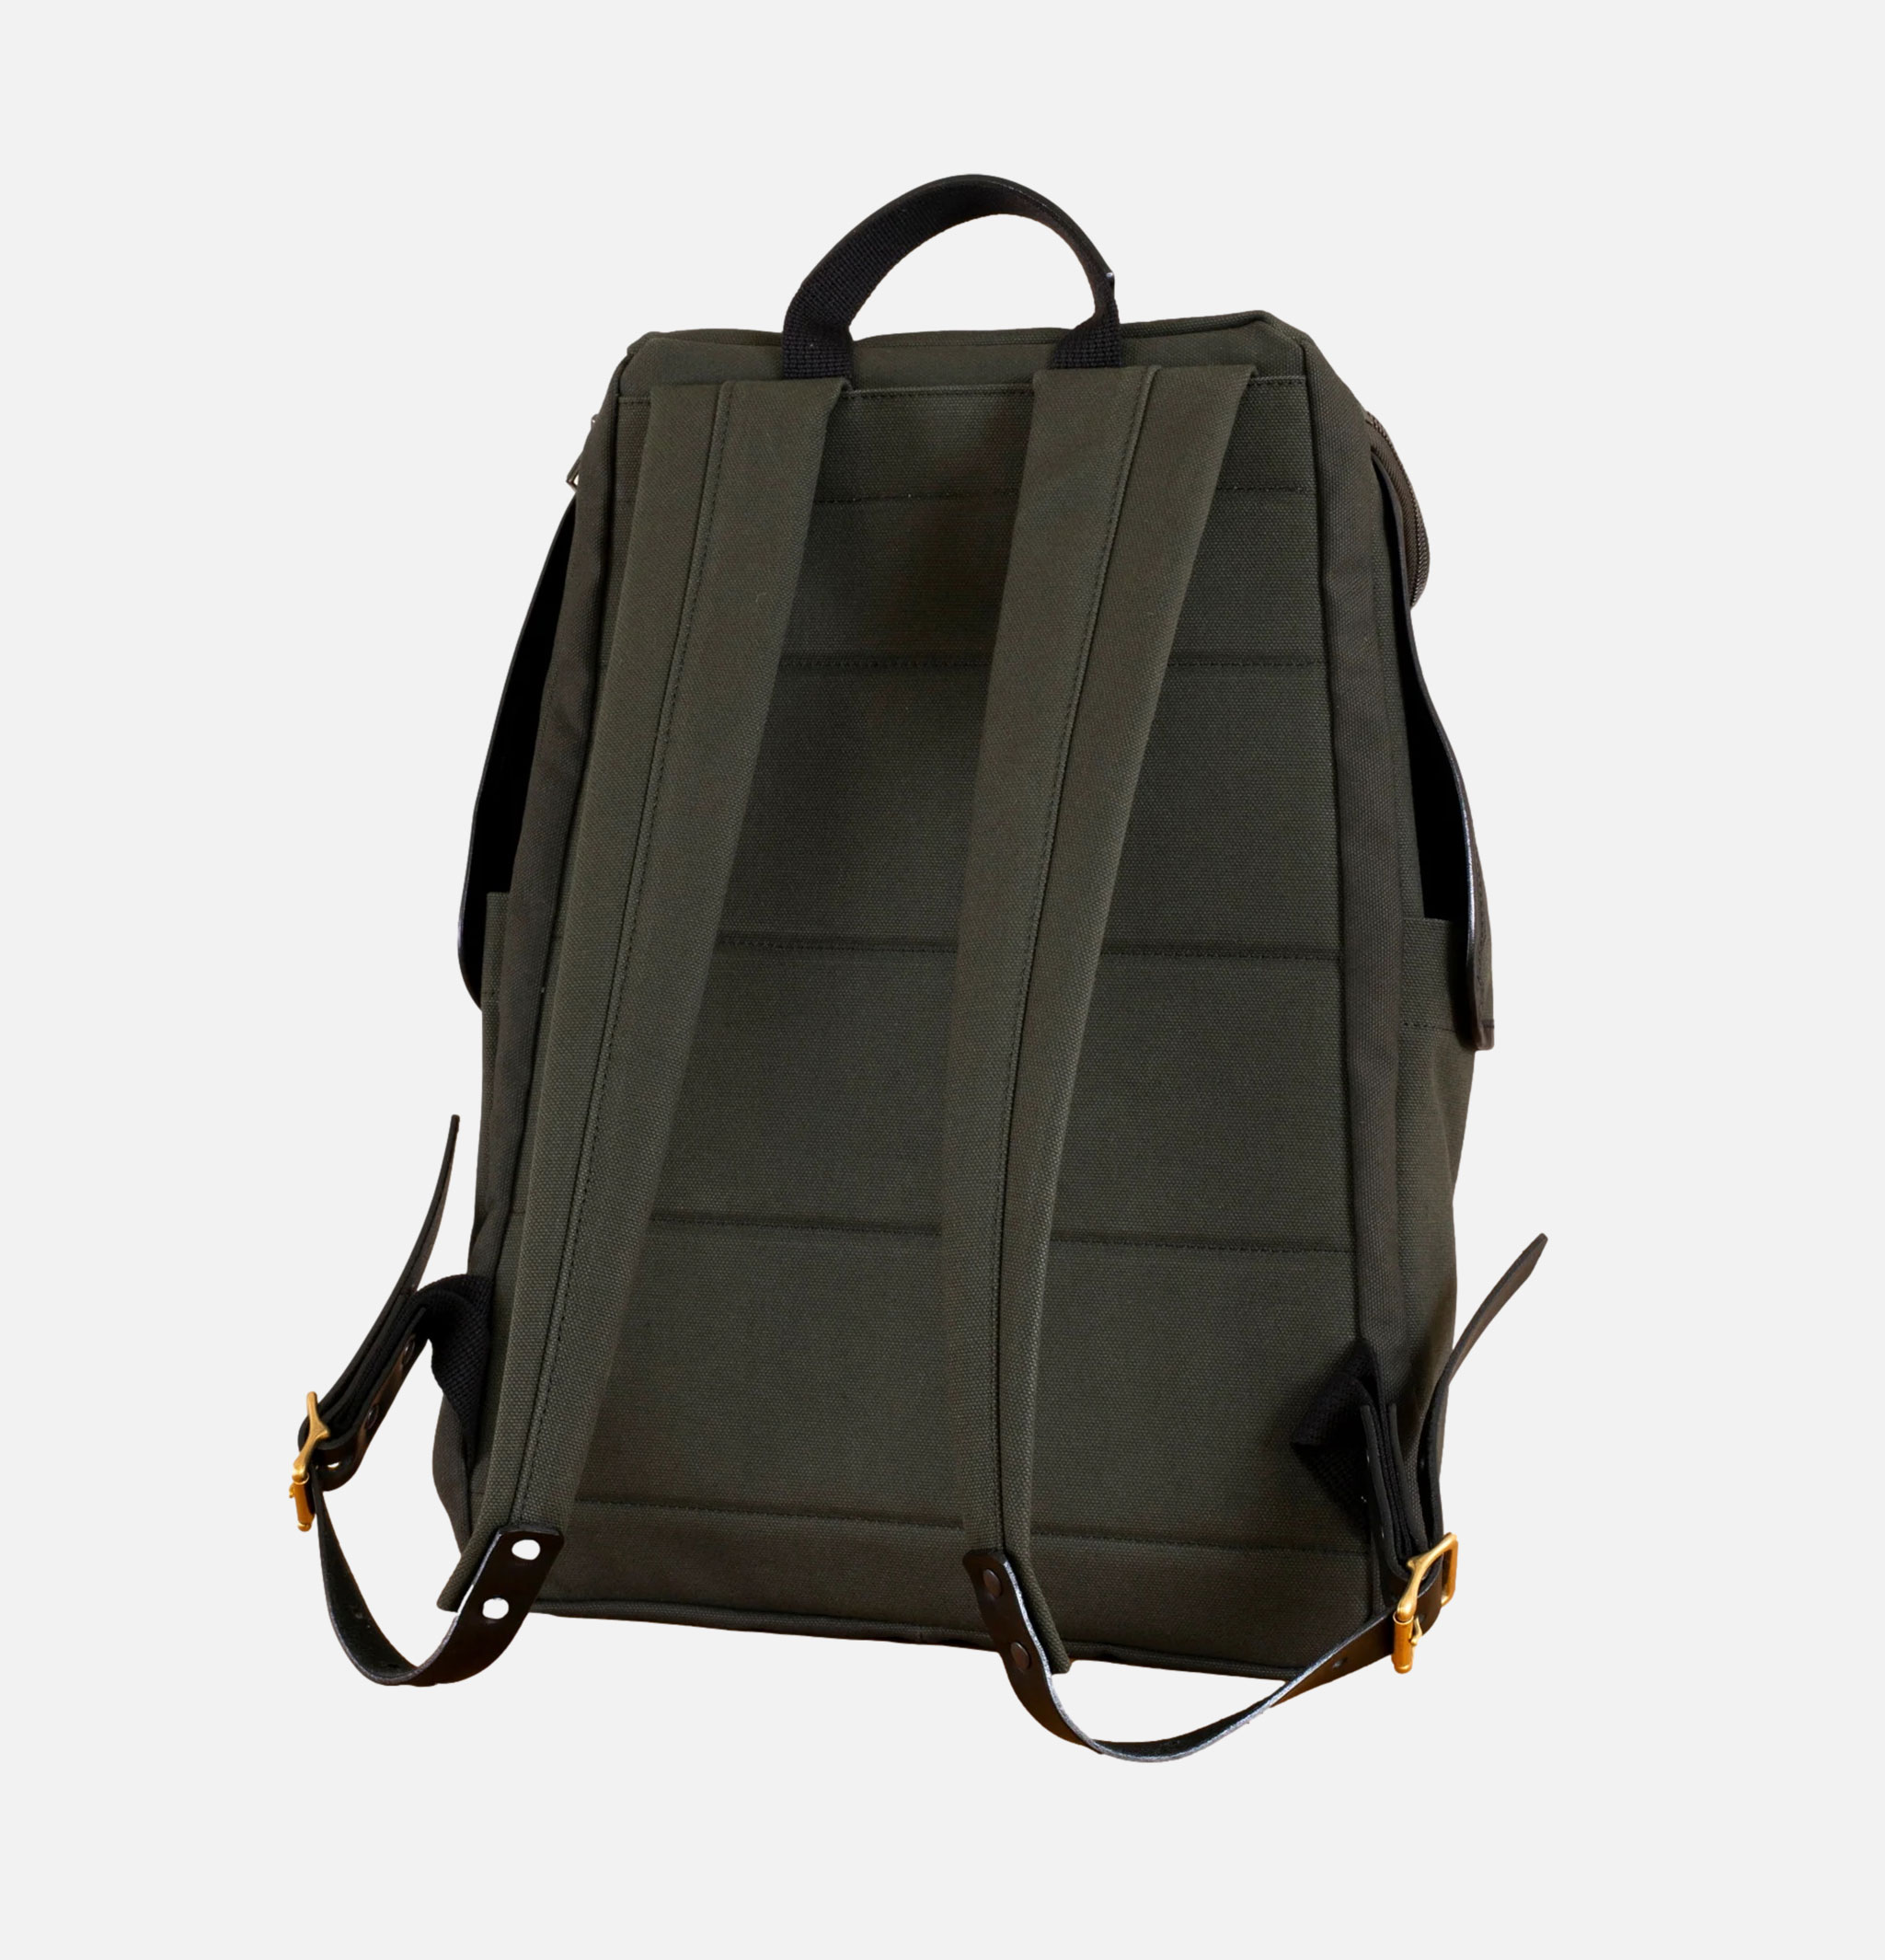 Southern Field Backpack Olive Green